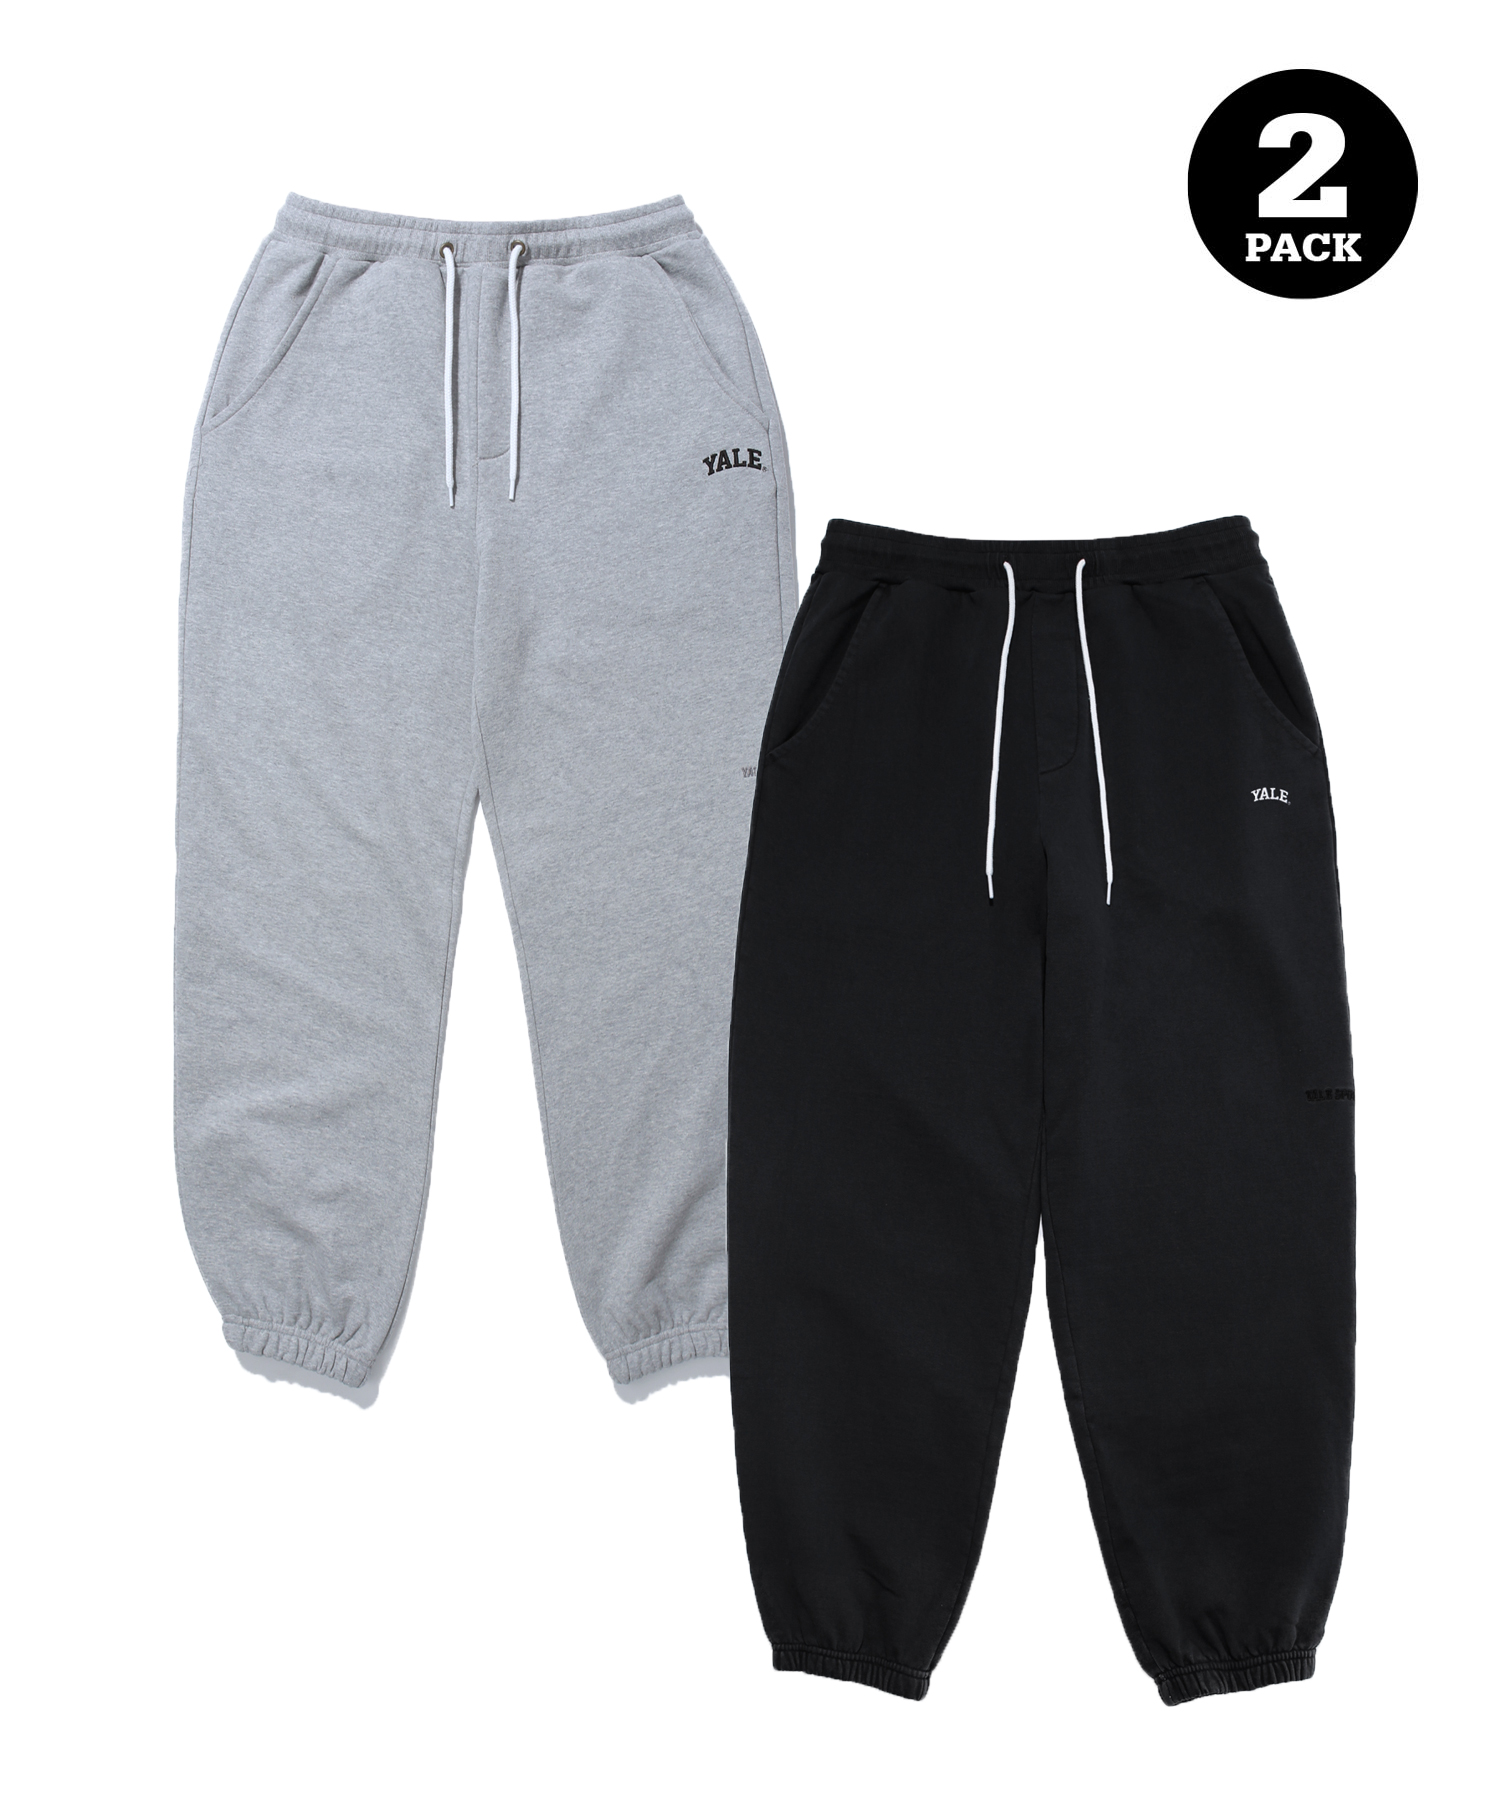 [ONEMILE WEAR] 2PACK SMALL ARCH SWEAT PANTS GRAY / BLACK